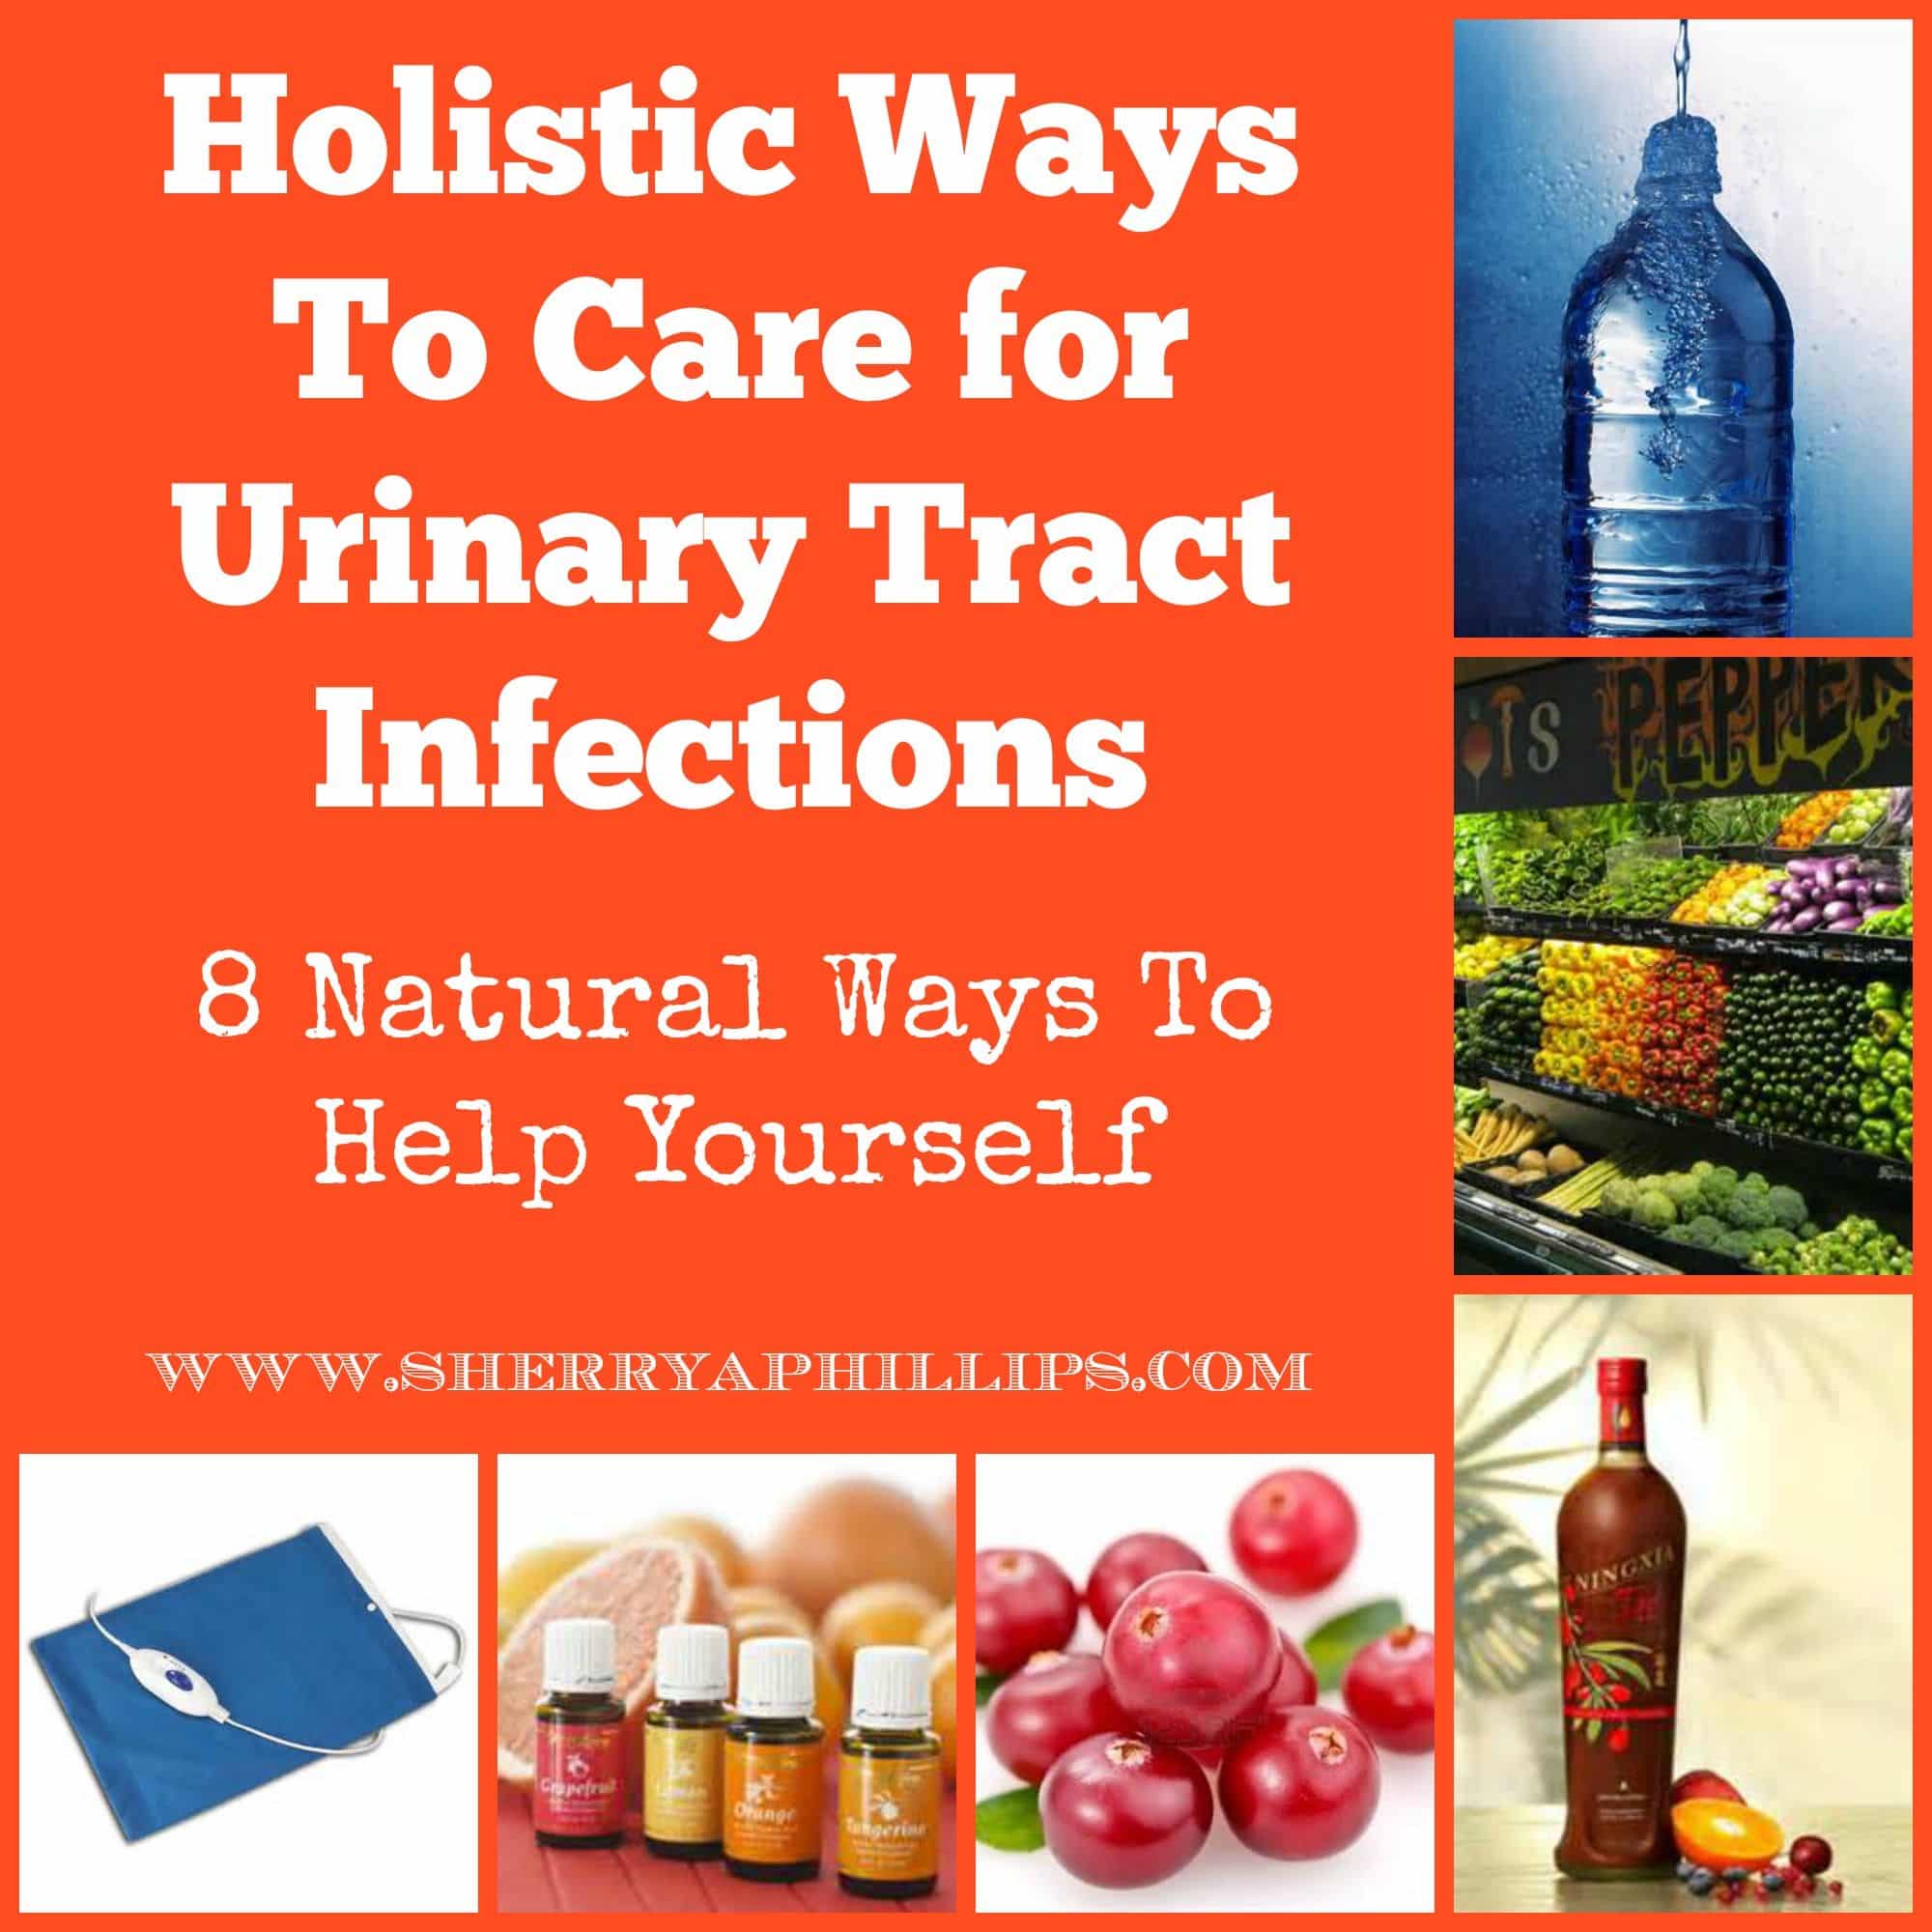 Holistic Ways to Care For Urinary Tract Infections